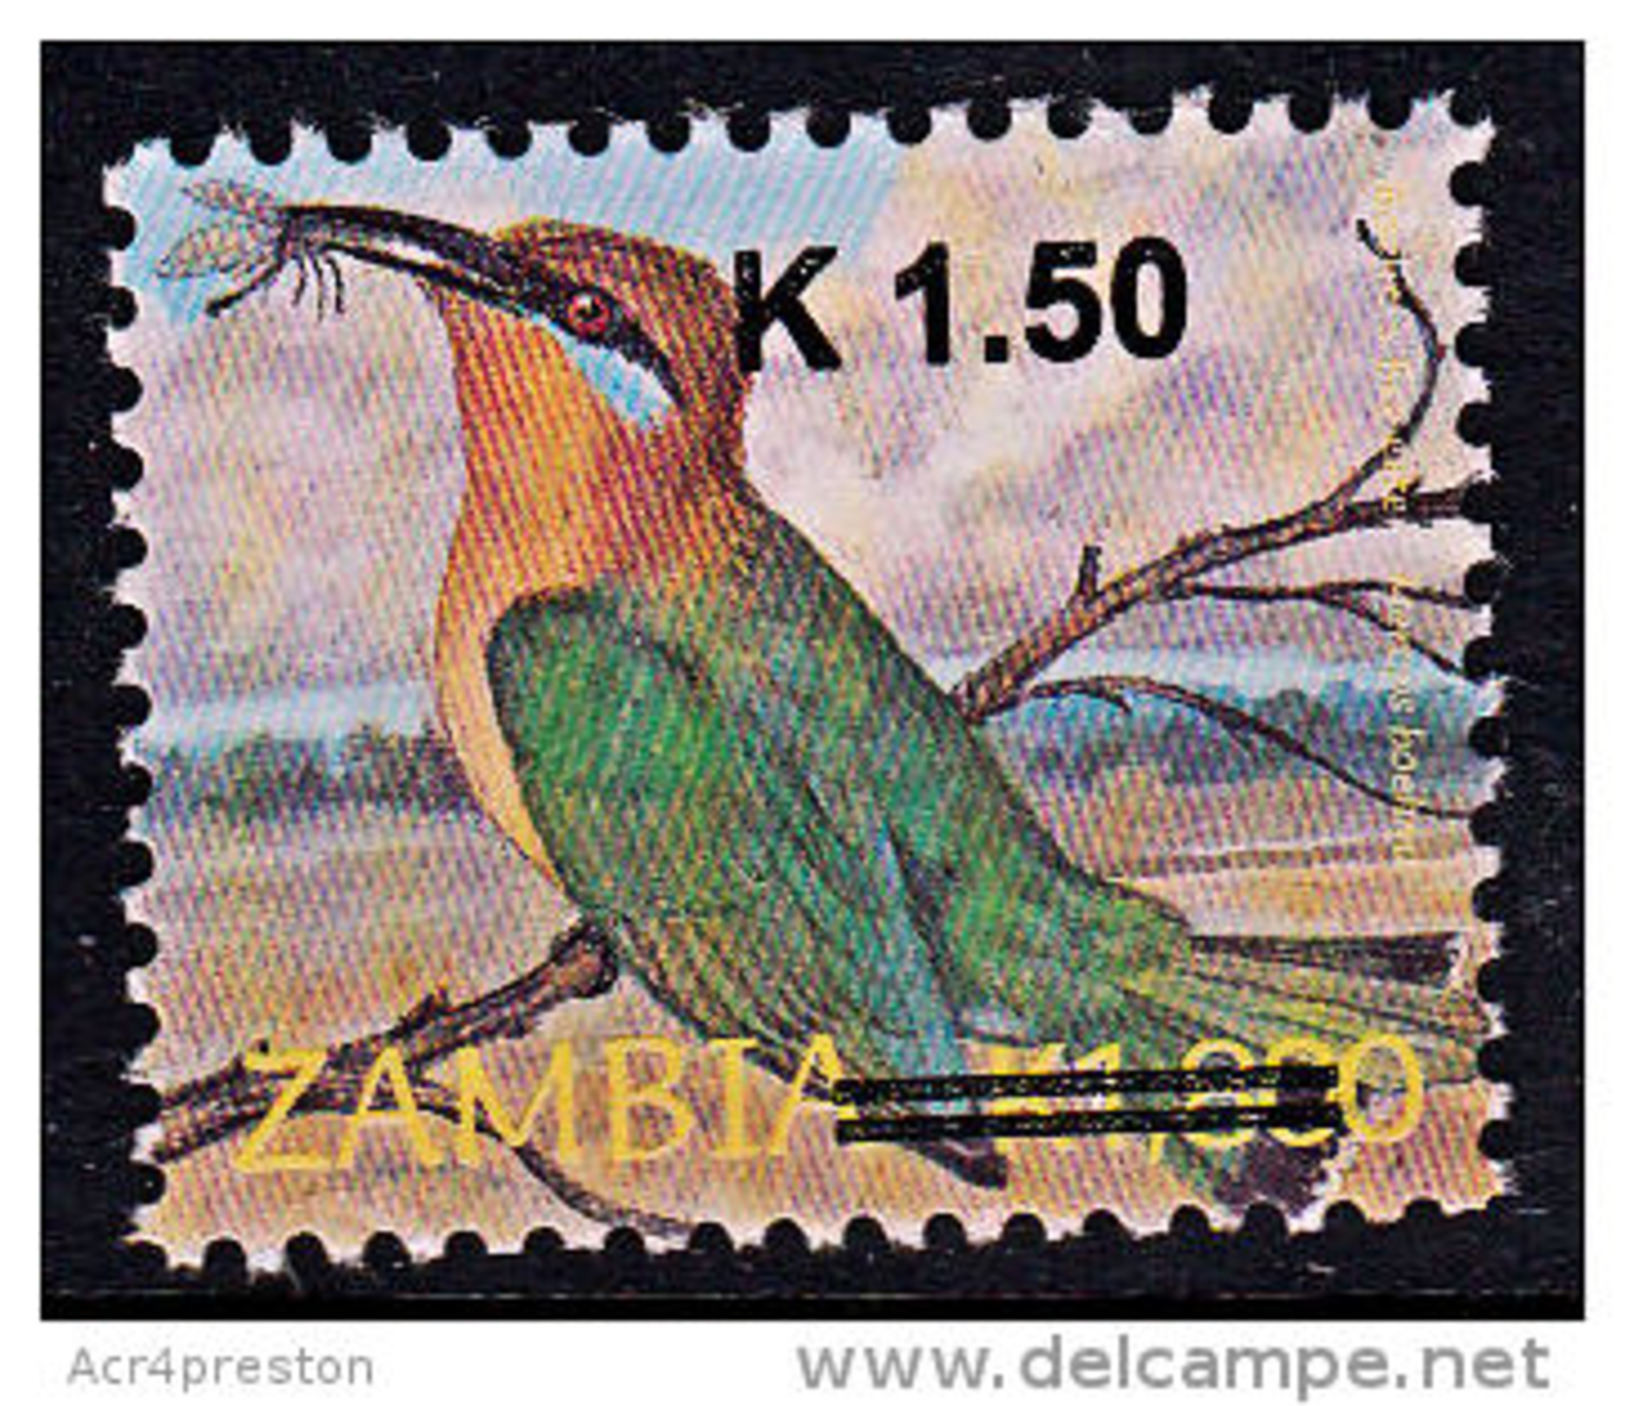 Zm1125 ZAMBIA 2014, New Currency K1.50 Surcharge On K1,800 Small Birds  MNH (Issued 02-05-2014) - Zambie (1965-...)